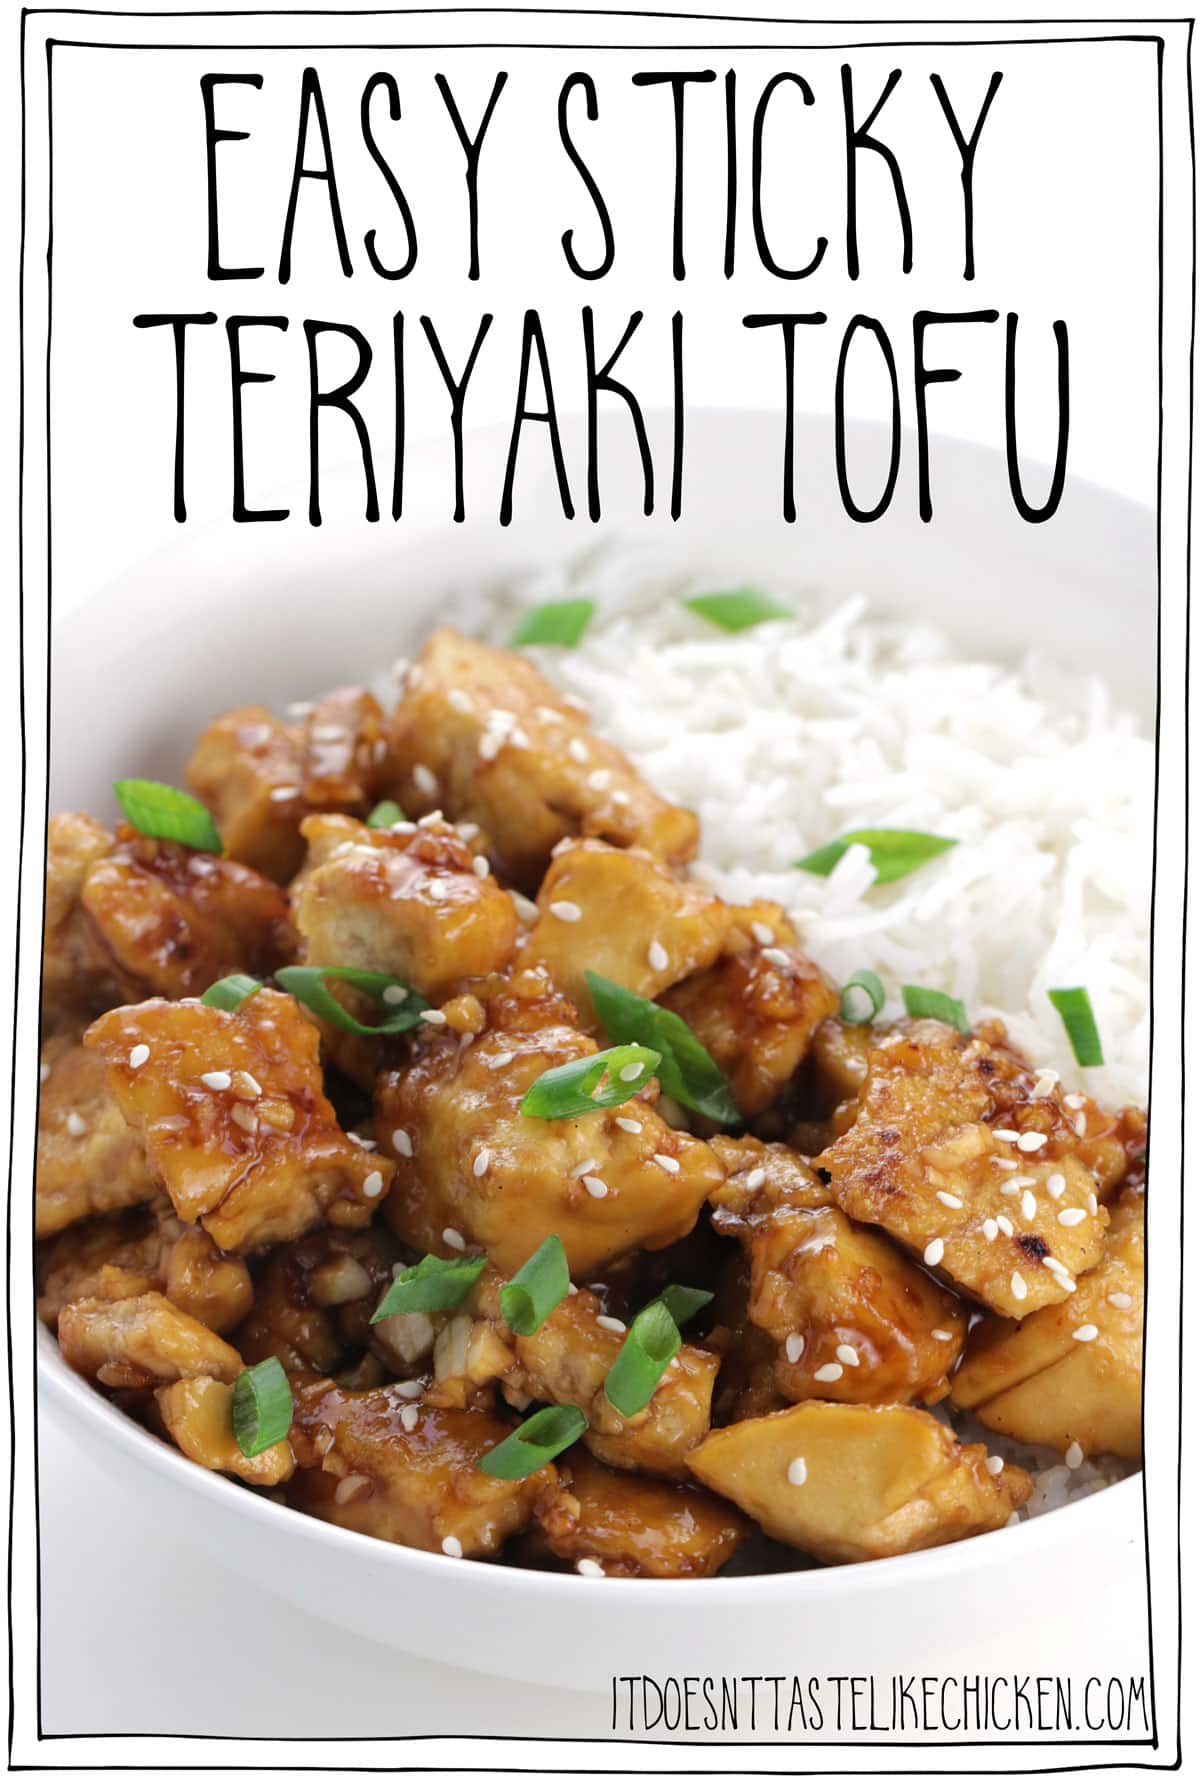 Easy Sticky Teriyaki Tofu! 10 minutes to cook, this tofu recipe is so easy to make and insanely delicious. In this recipe I share with you the key to making tofu taste like chicken!! (Yes, I'm aware of the irony)! Haha. #itdoesnttastelikechicken #veganrecipes #tofu